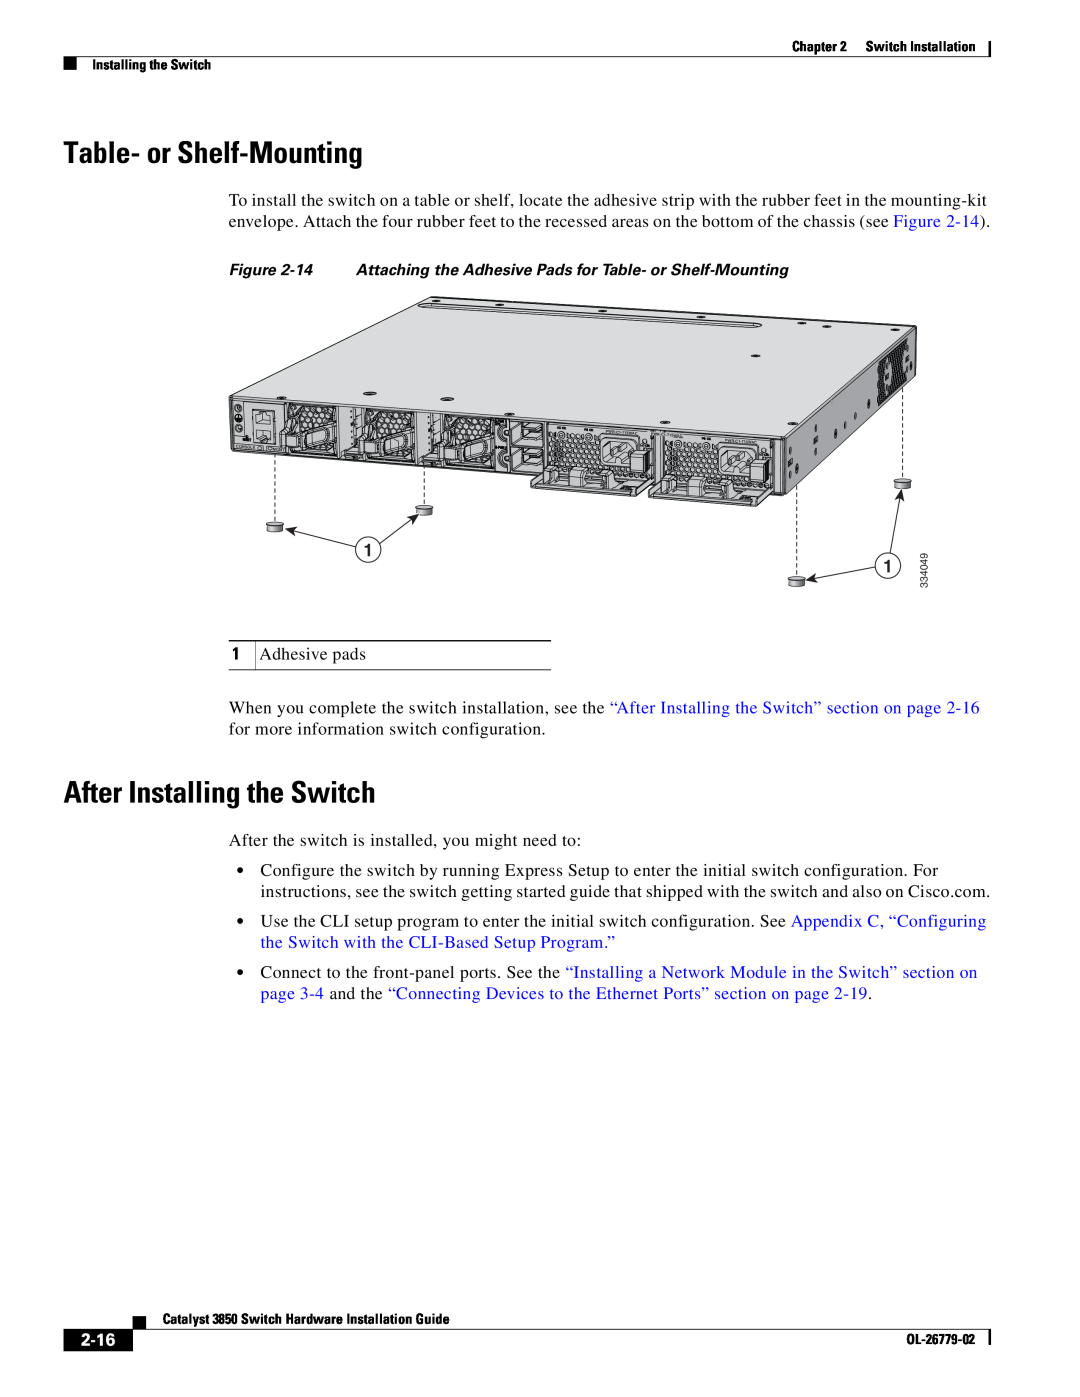 Cisco Systems C3850NM41G, WSC385024TS, C3850NM210G manual Table- or Shelf-Mounting, After Installing the Switch, 2-16 